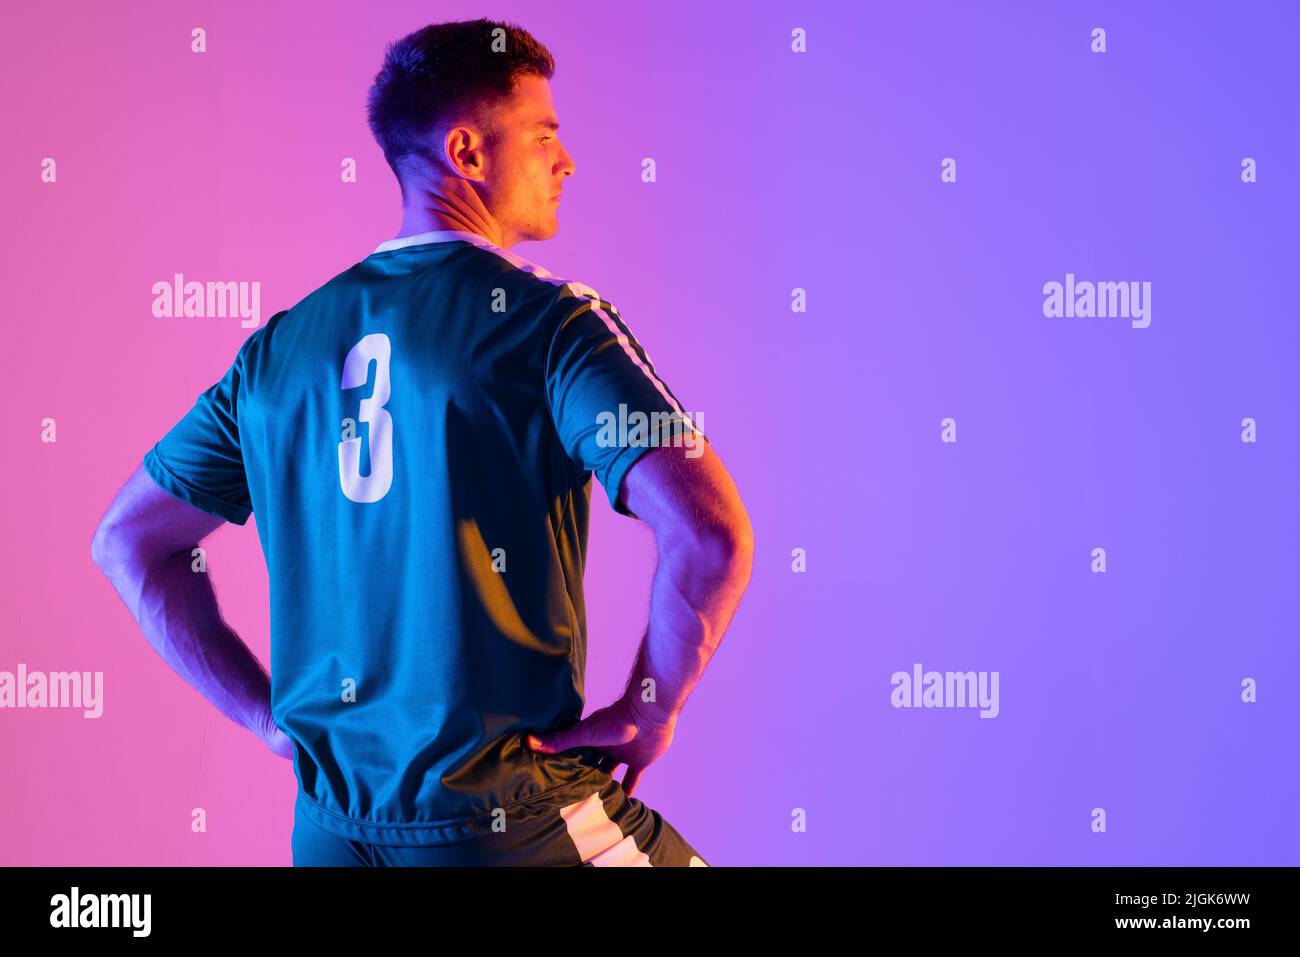 Caucasian male soccer player over neon pink lighting Stock Photo